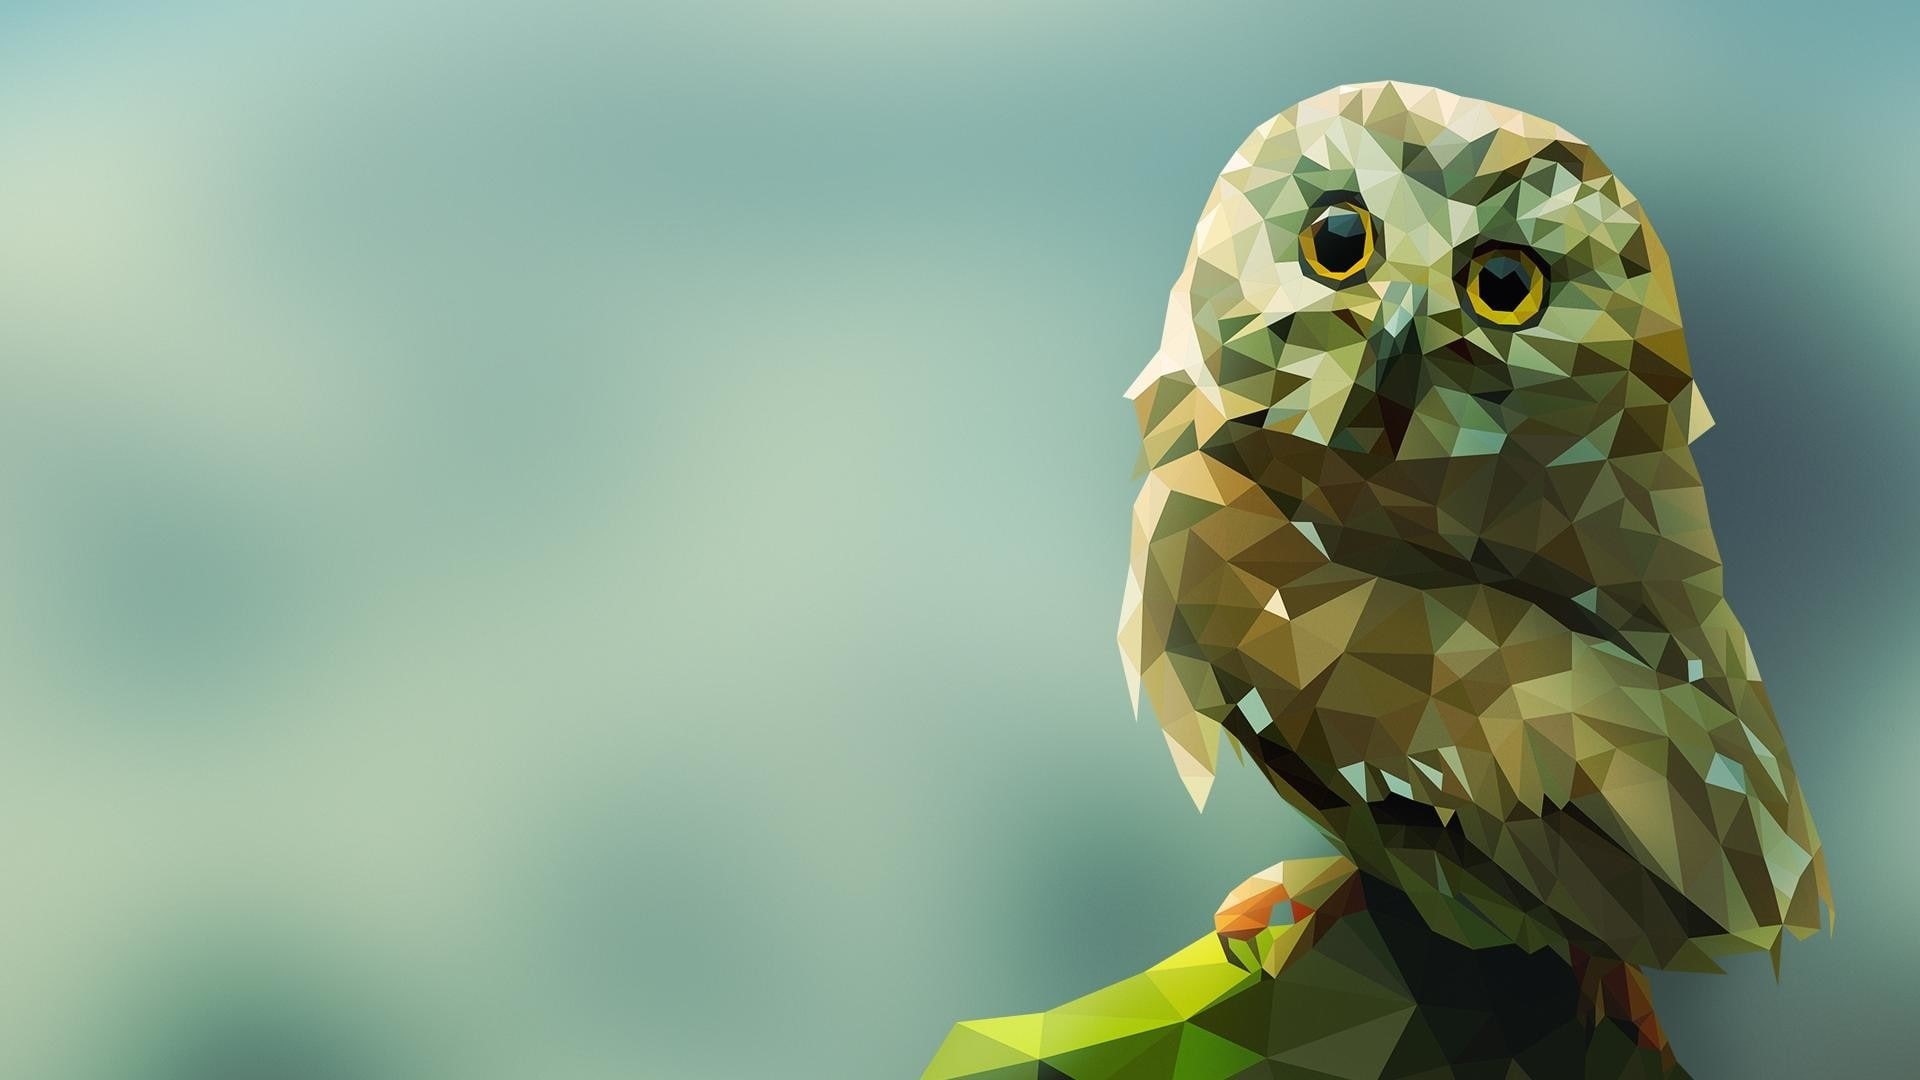 Spectacular and colorful designs of animals in polygonal style